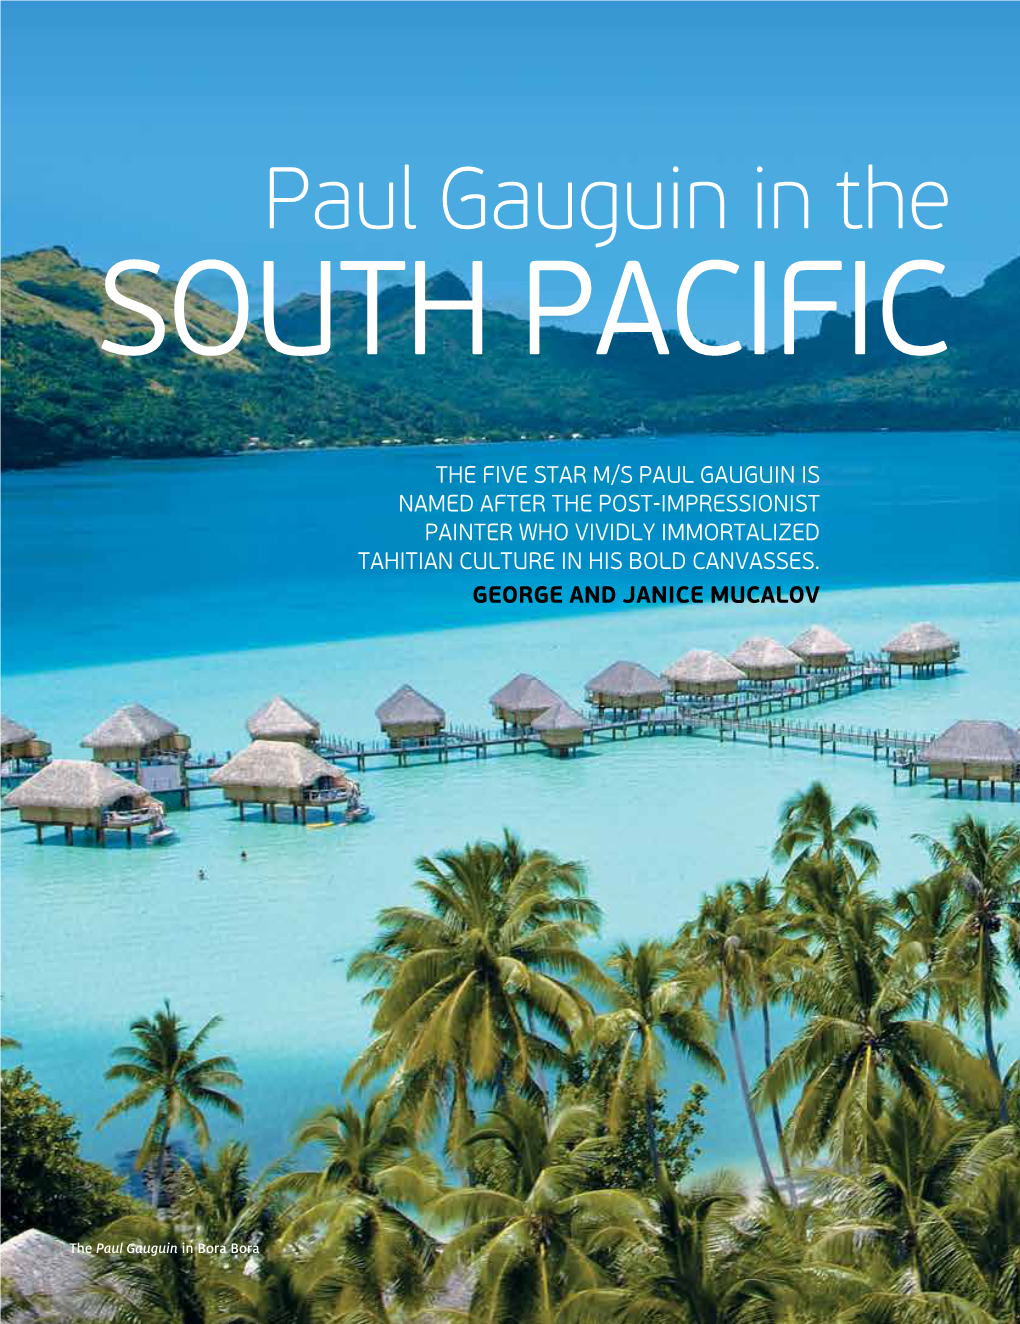 Paul Gauguin in the South Pacific